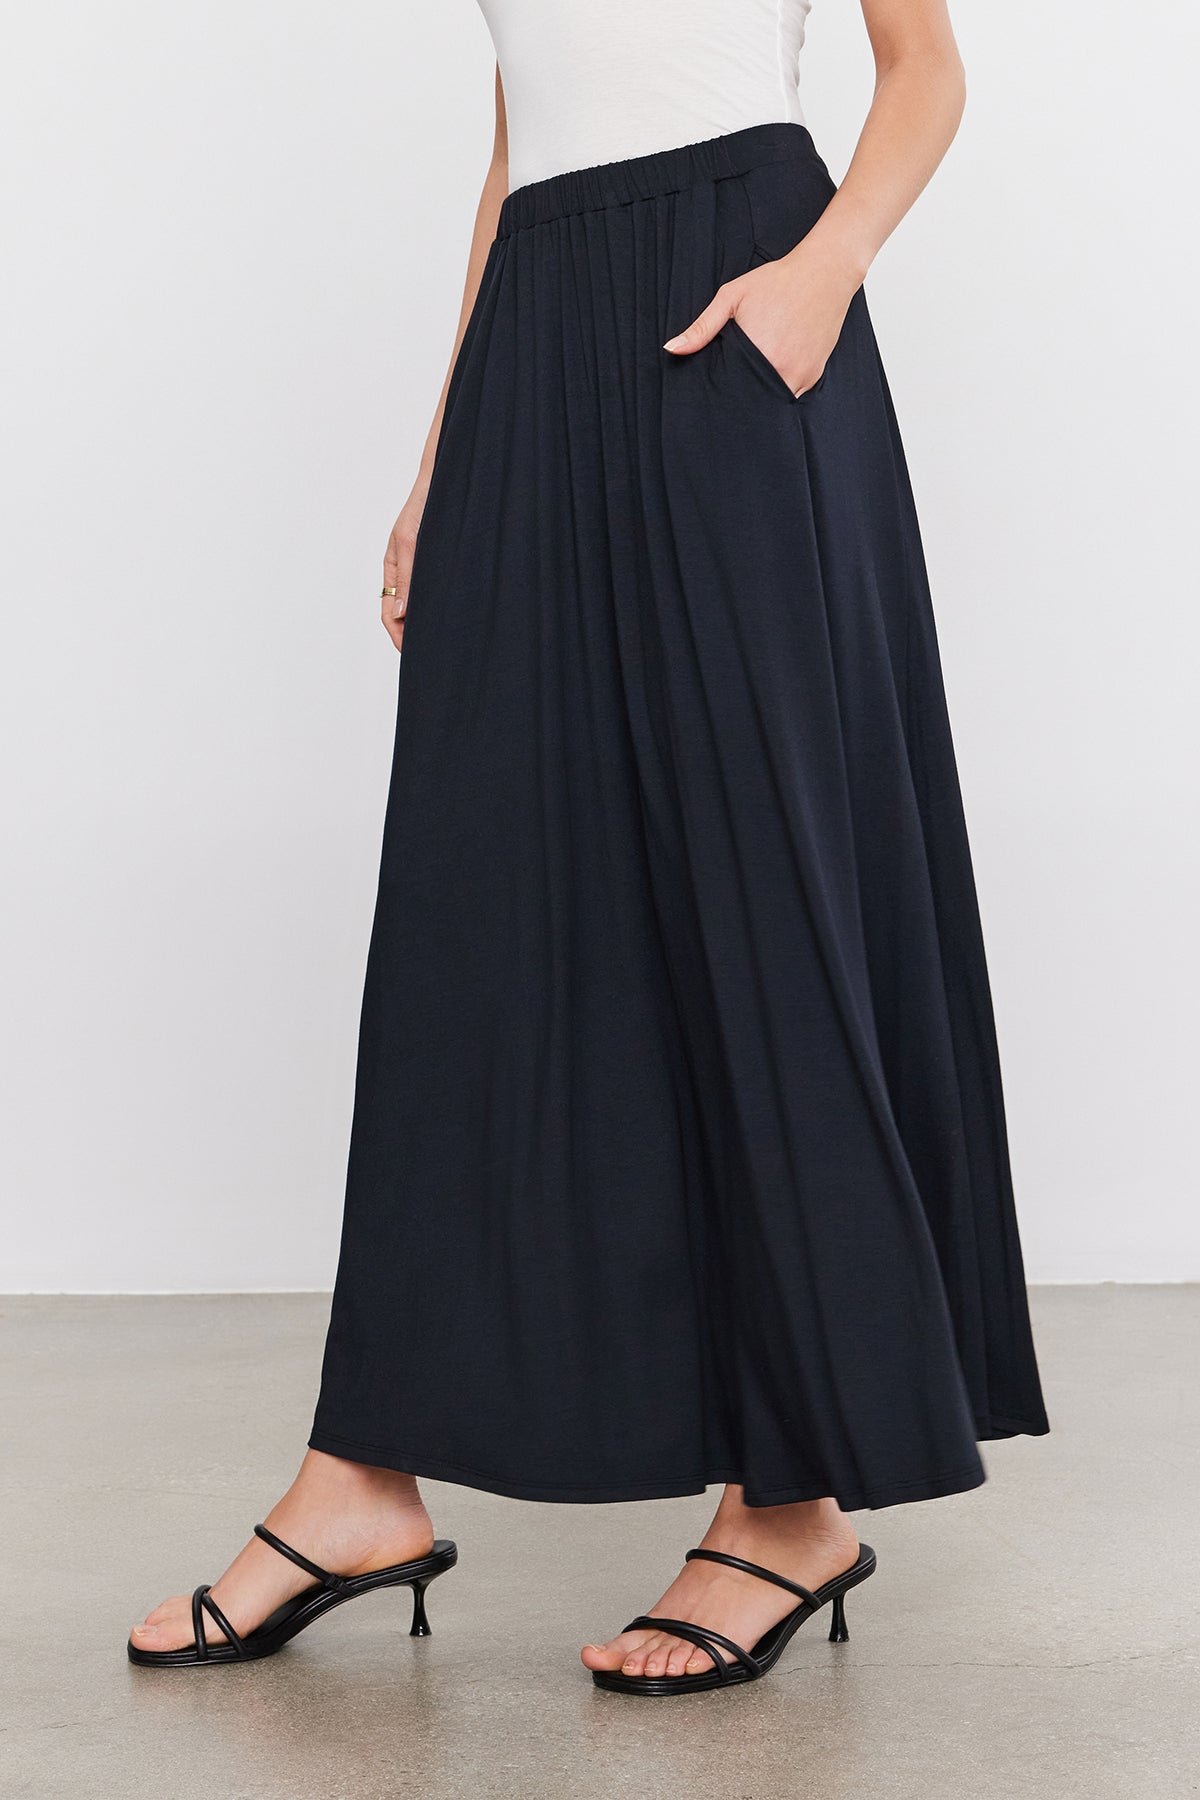   A woman wearing a navy pleated MALAYA MAXI SKIRT by Velvet by Graham & Spencer. 